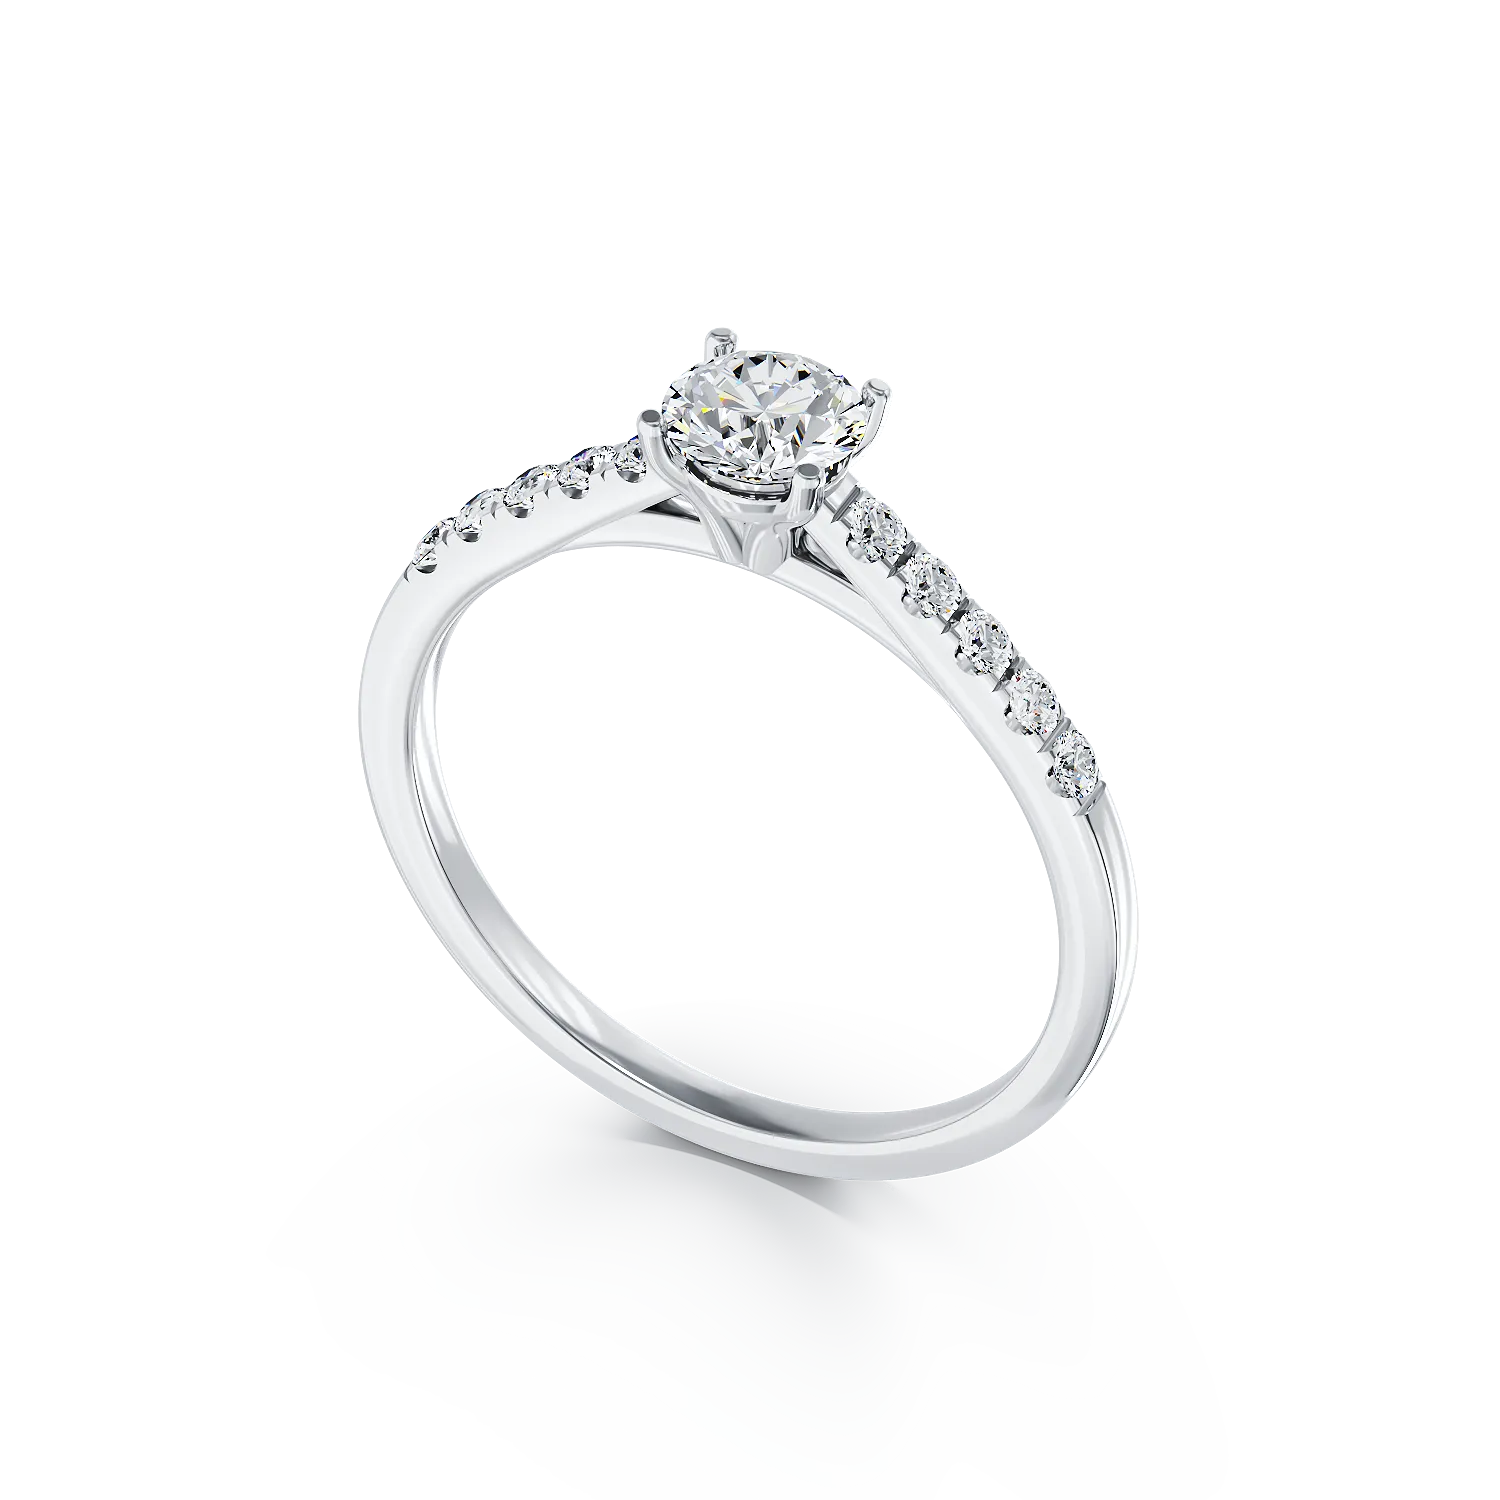 18K white gold engagement ring with 0.4ct diamond and 0.14ct diamonds